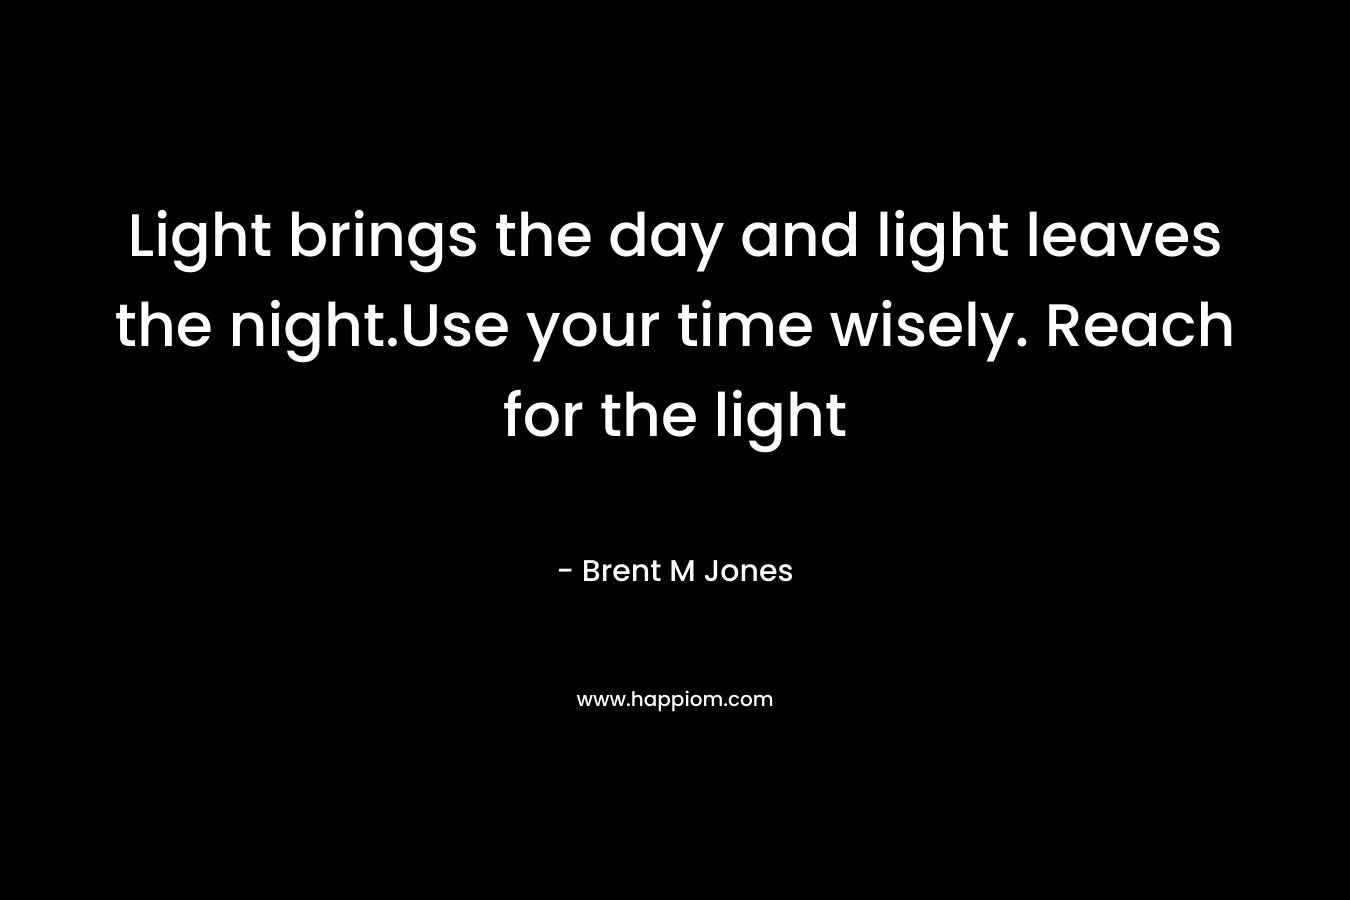 Light brings the day and light leaves the night.Use your time wisely. Reach for the light